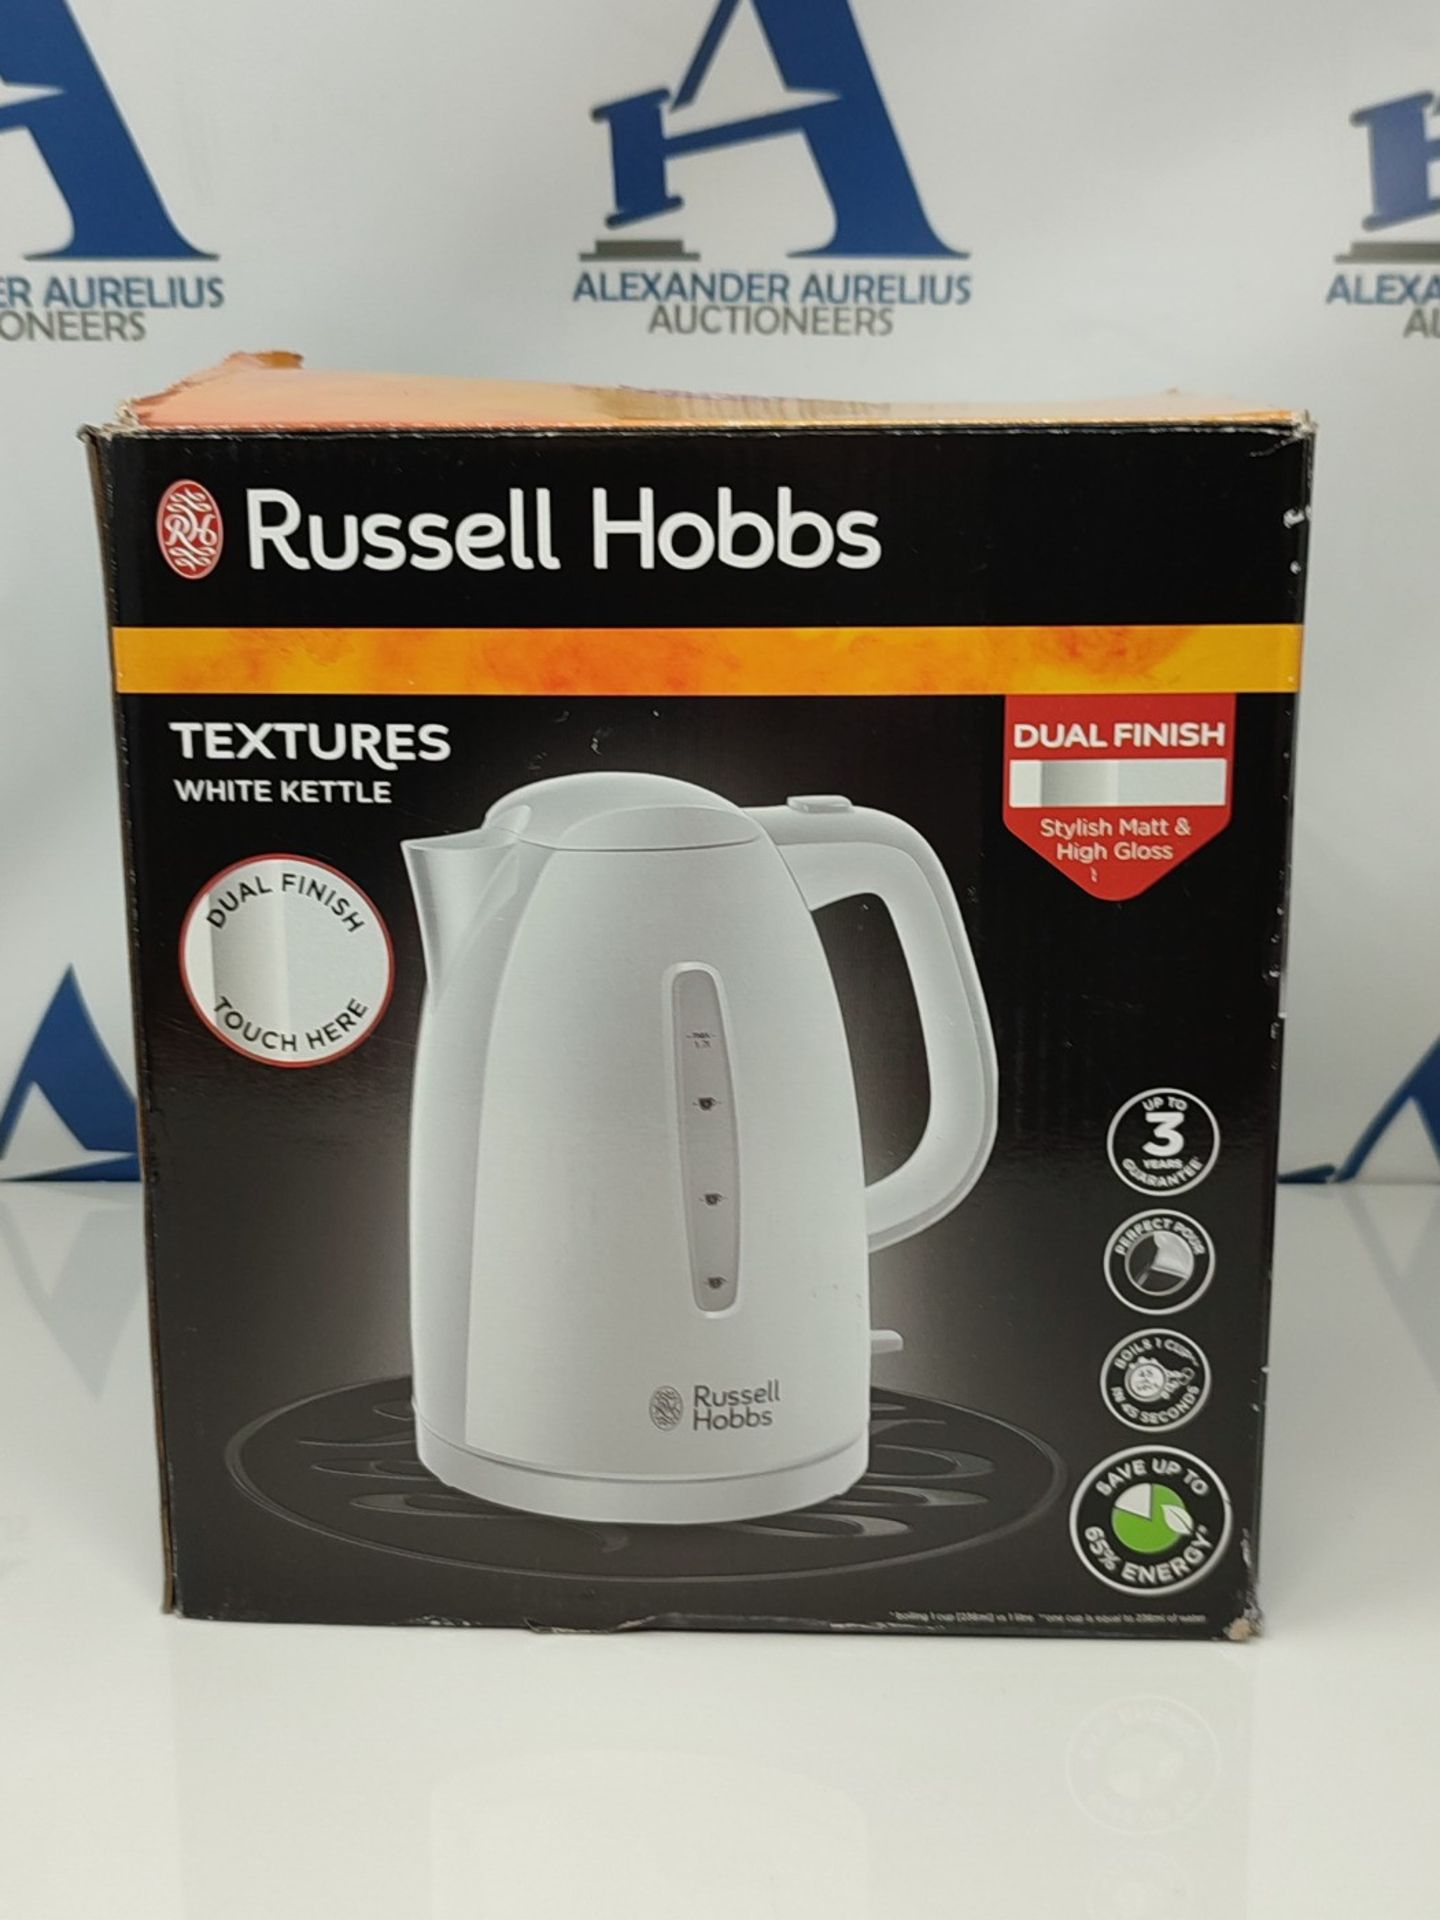 Russell Hobbs 21270 Textures Plastic Kettle, 1.7 Litre, 3000 W, White - Image 2 of 3